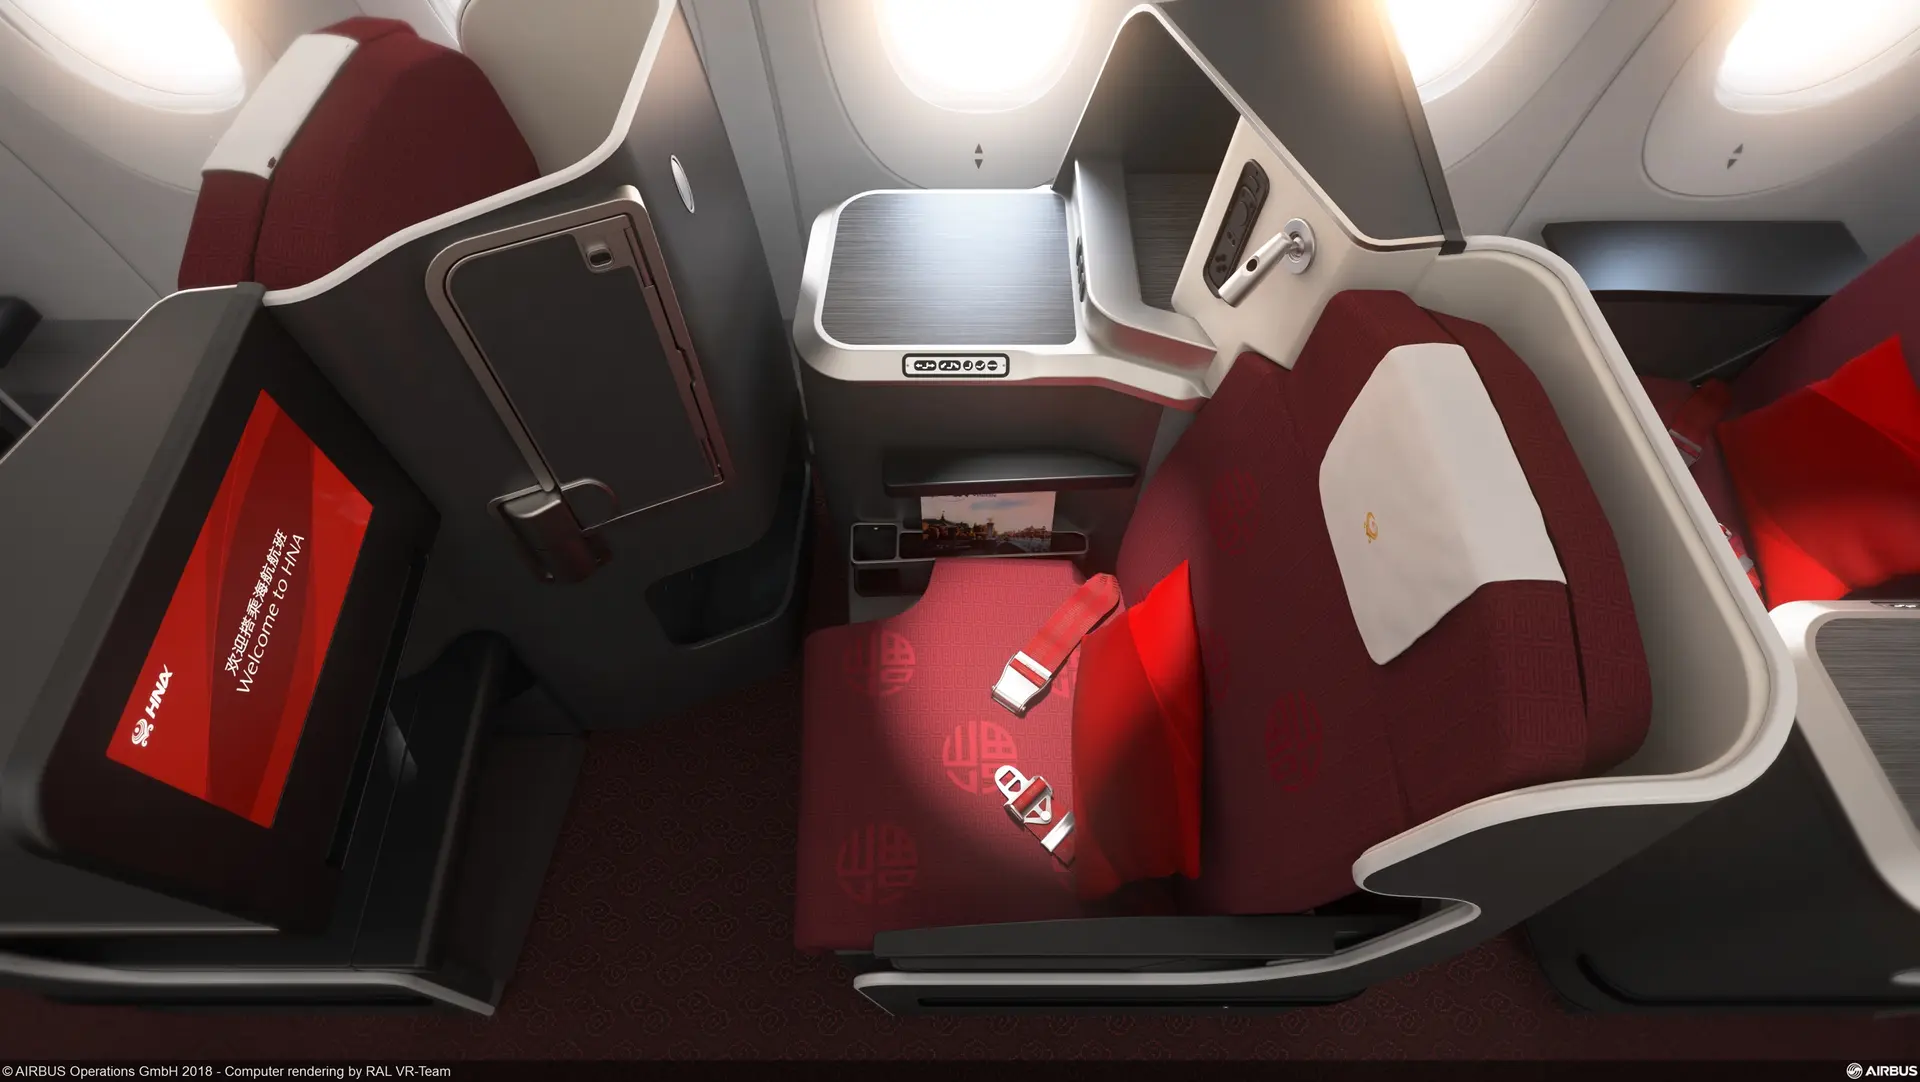 Airline review Cabin & Seat - Hainan Airlines - 1